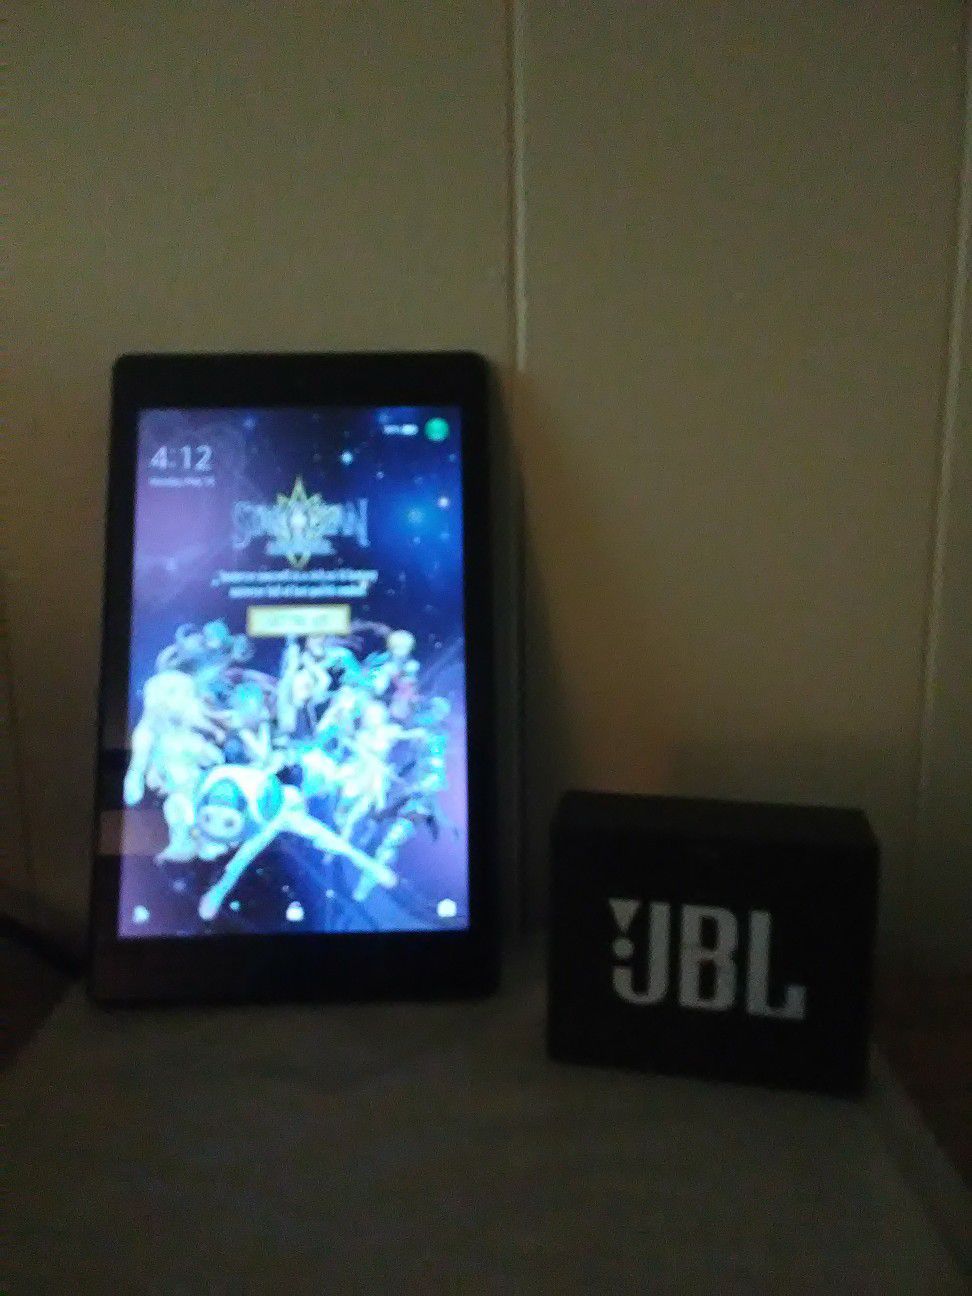 Amazon fire HD 8 with Alexa and JBL GO Bluetooth speaker